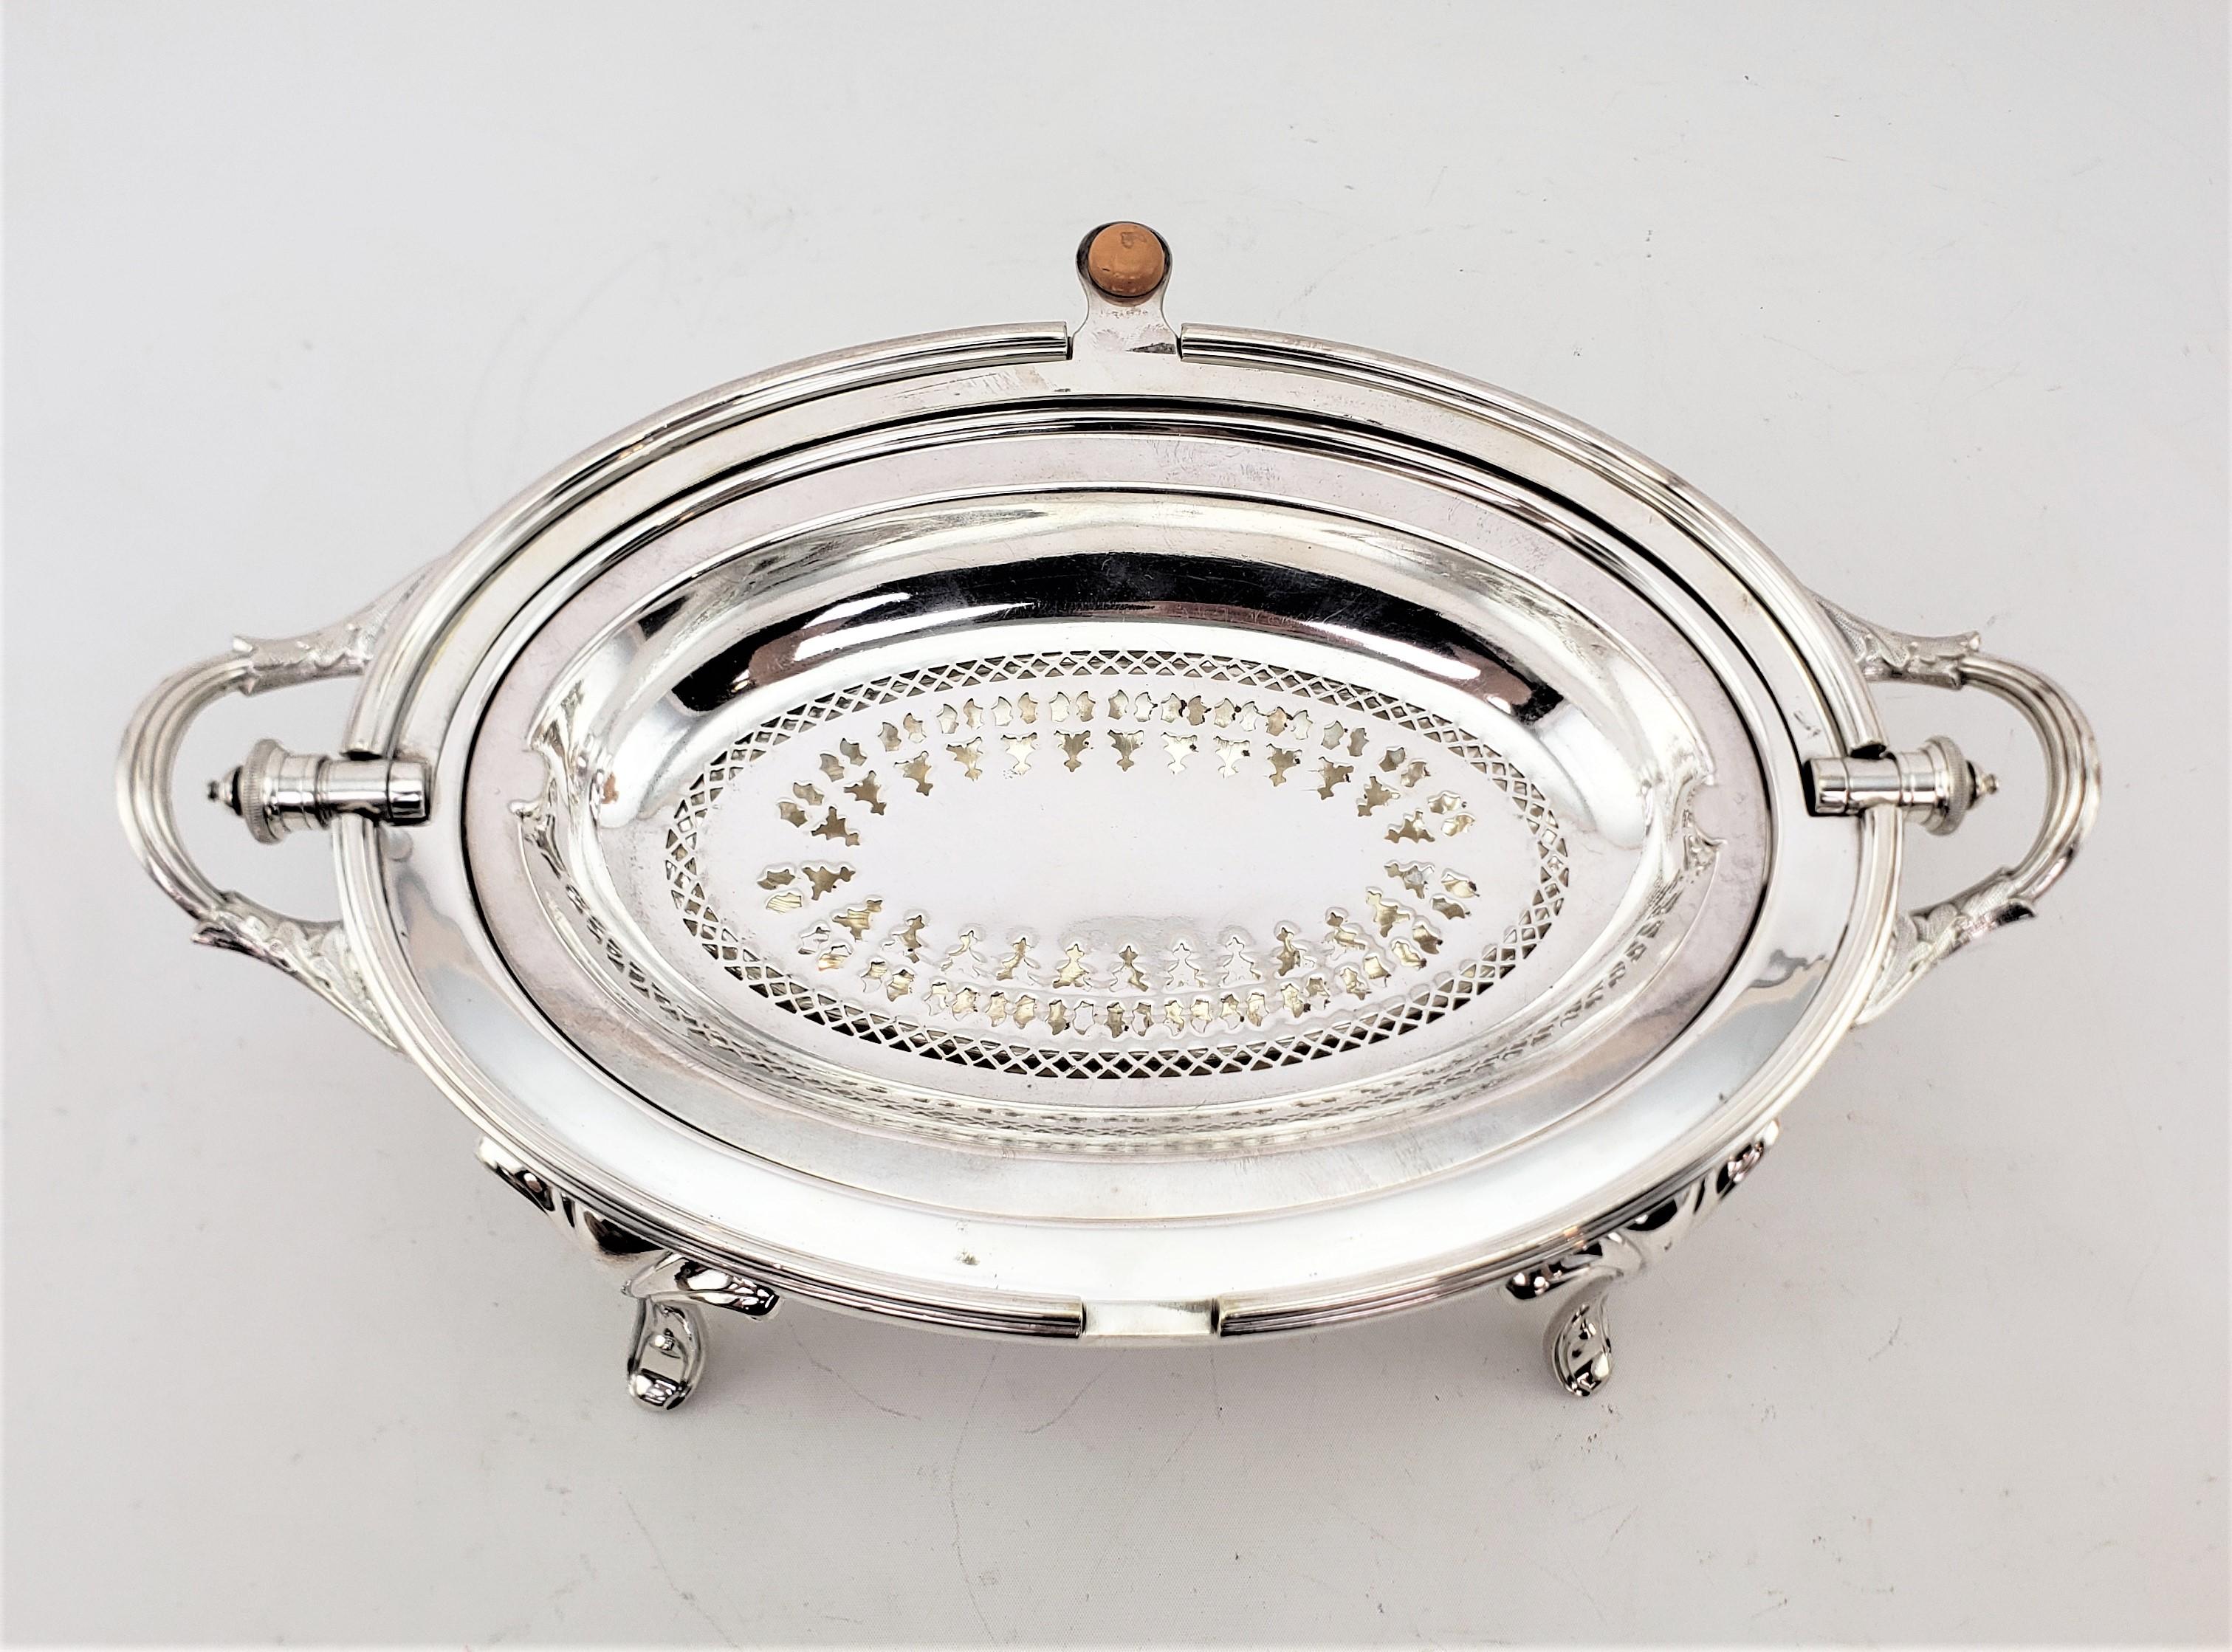 Antique English Silver Plated Domed Breakfast Warmer or Server 4